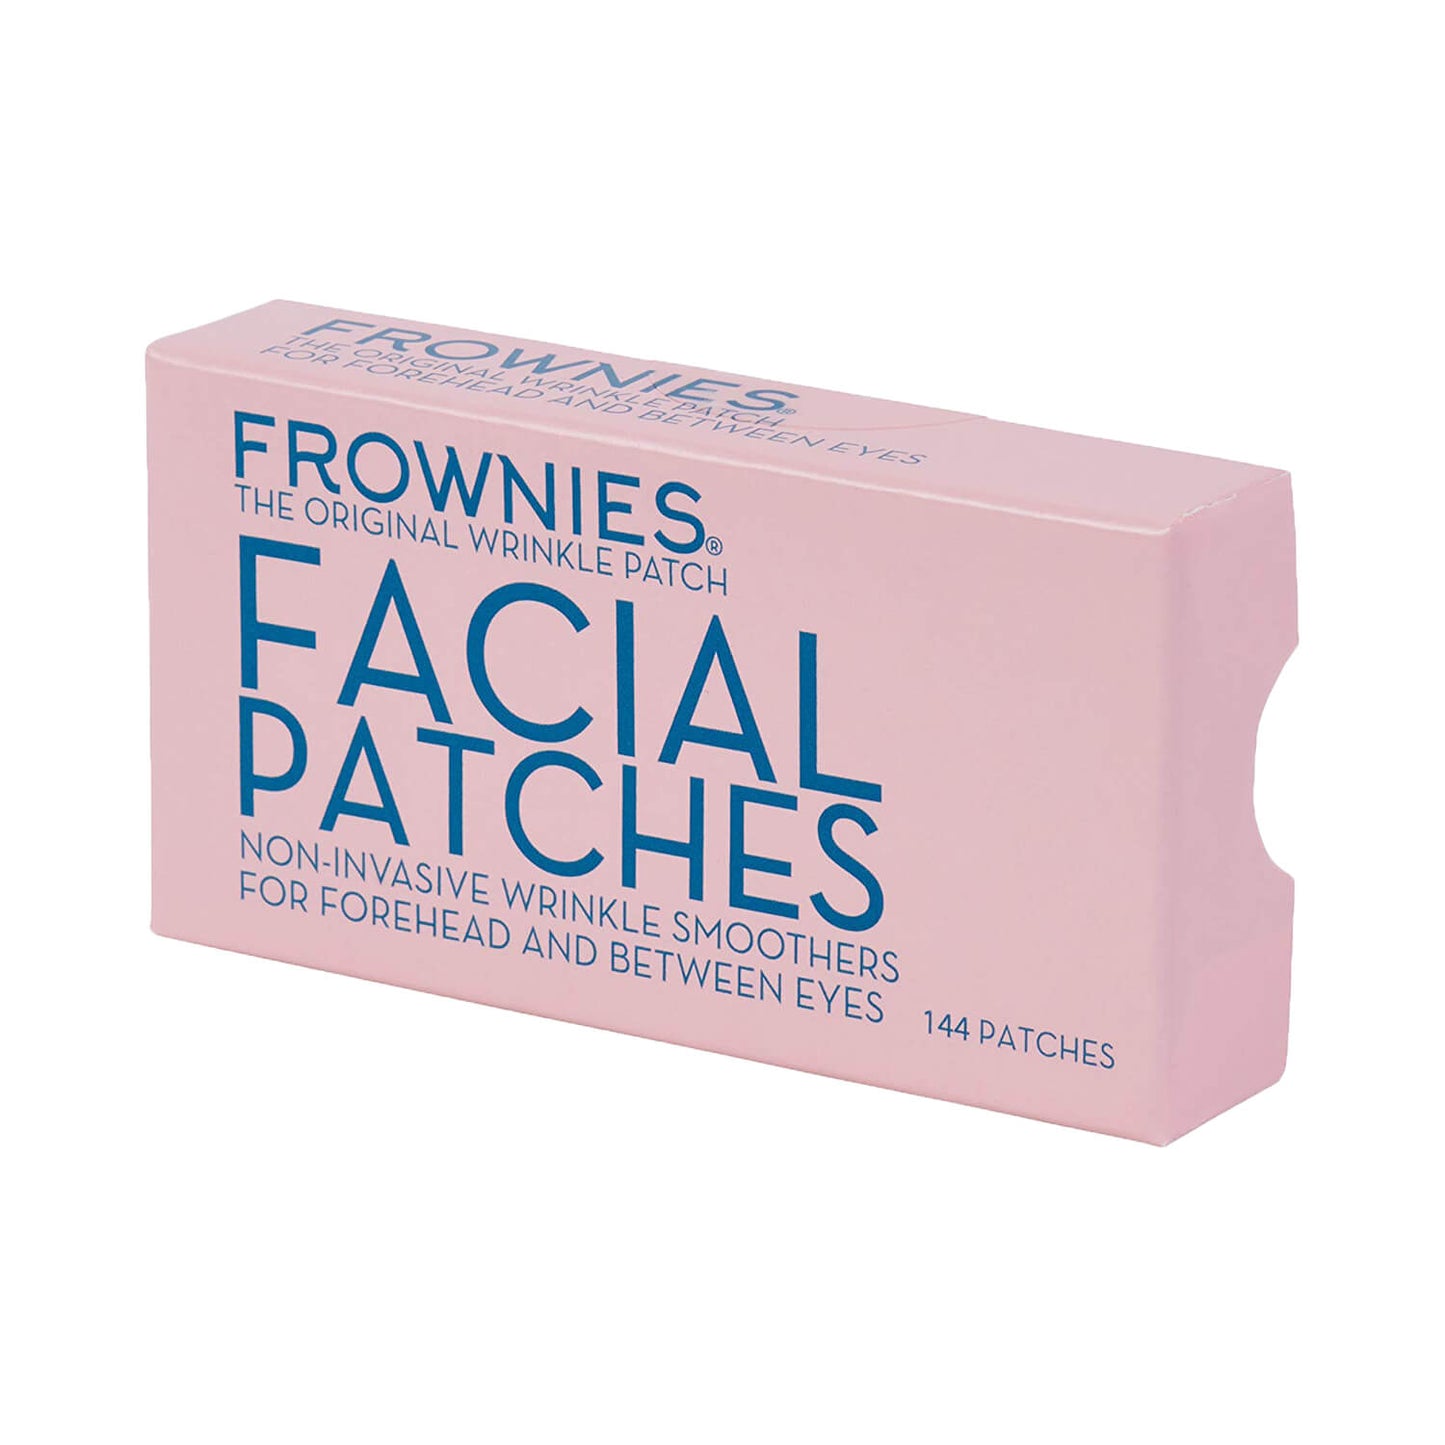 Frownies 144 Facial Patches for Wrinkles on the Forehead & Between Eyes (FBE)